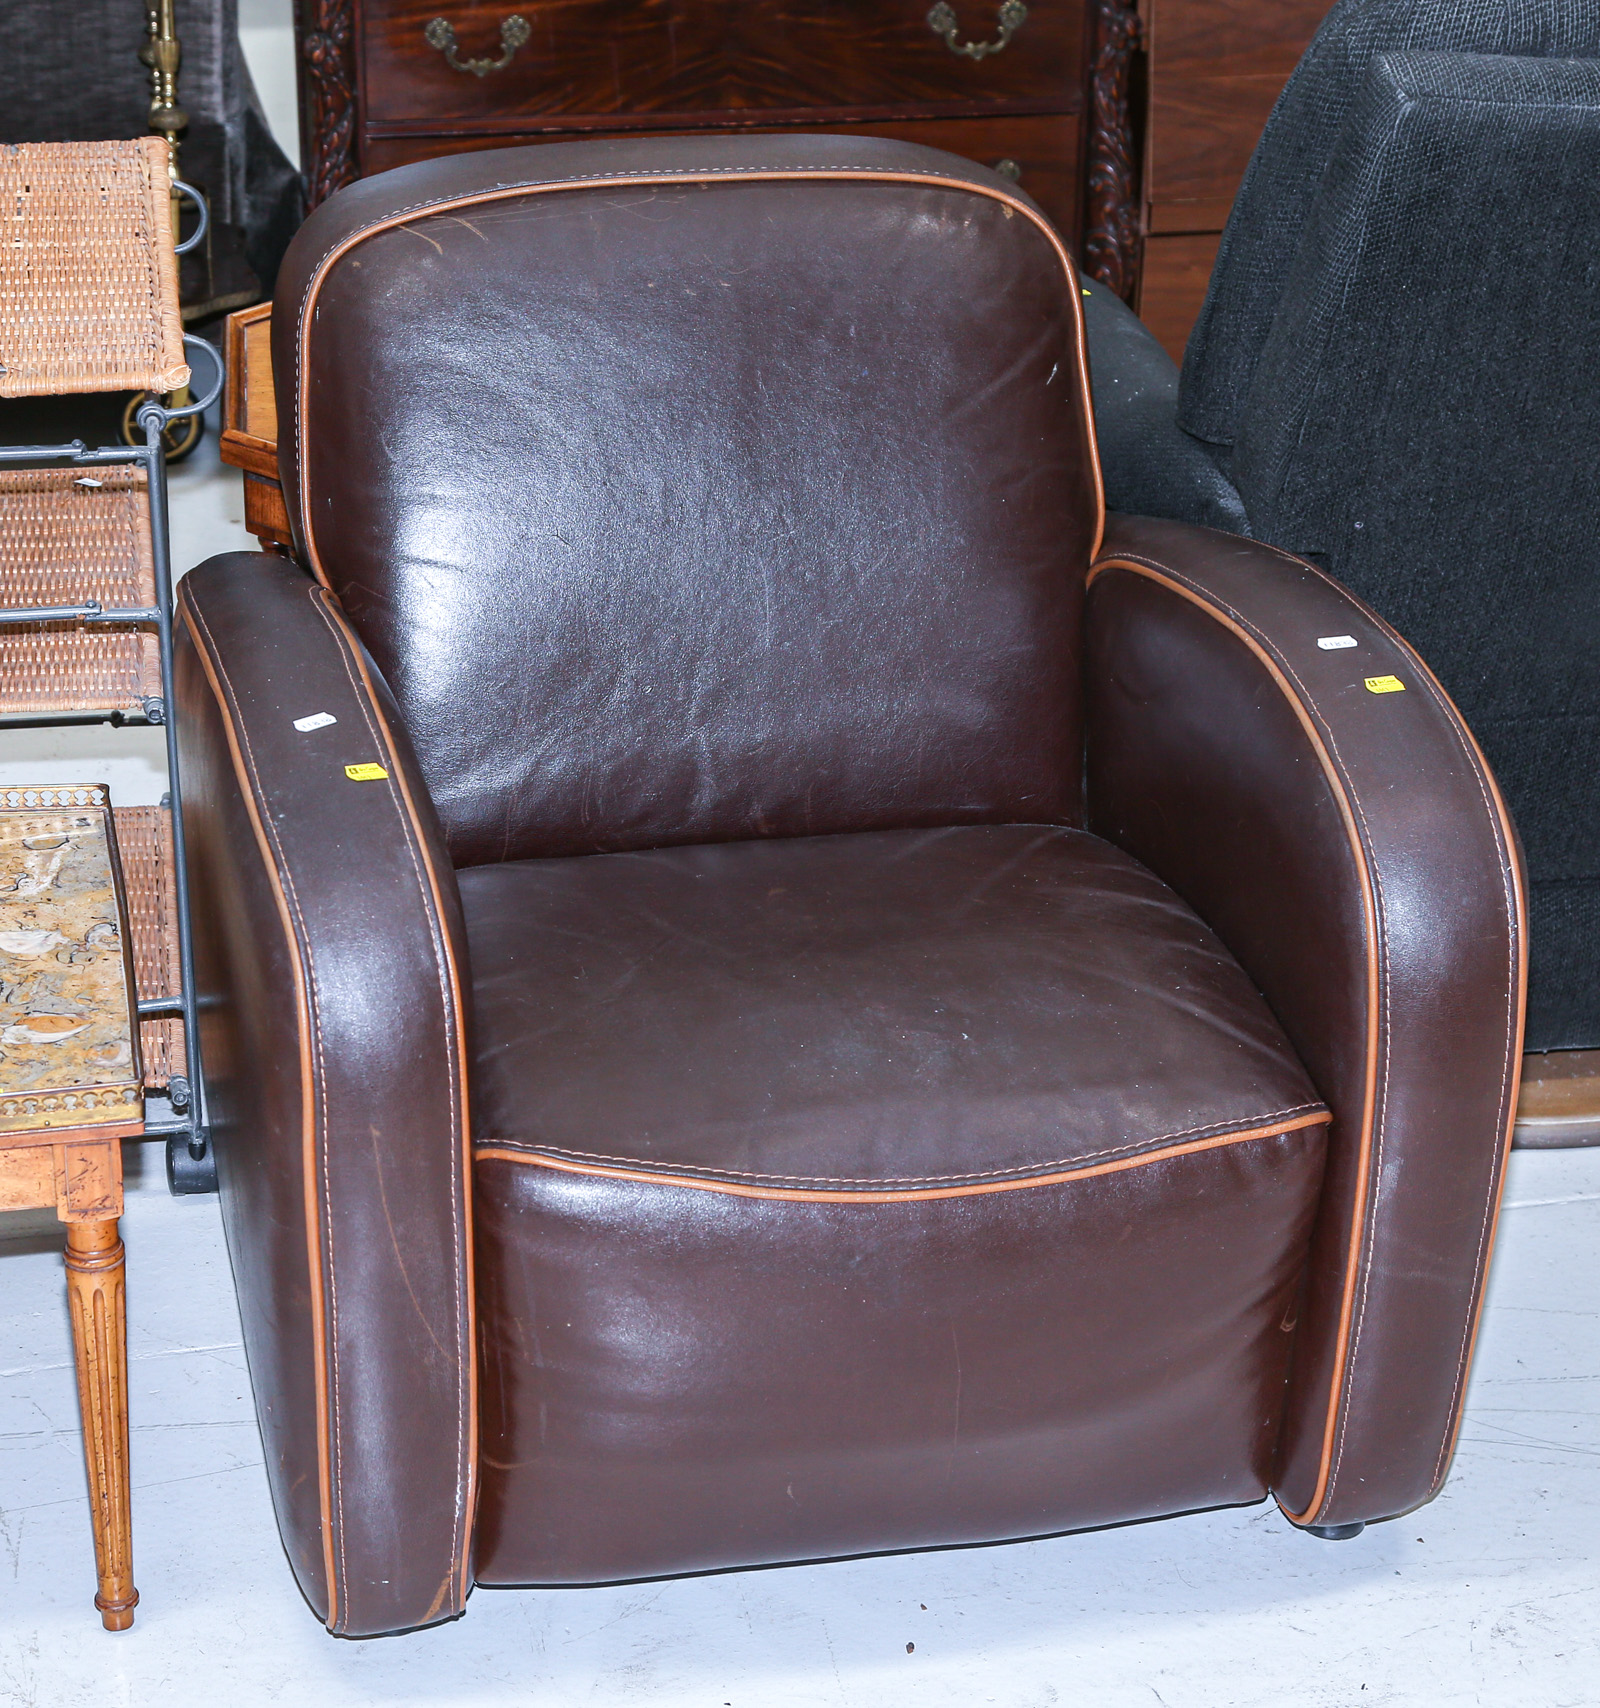 ART DECO STYLE LEATHER UPHOLSTERED 2e8b64